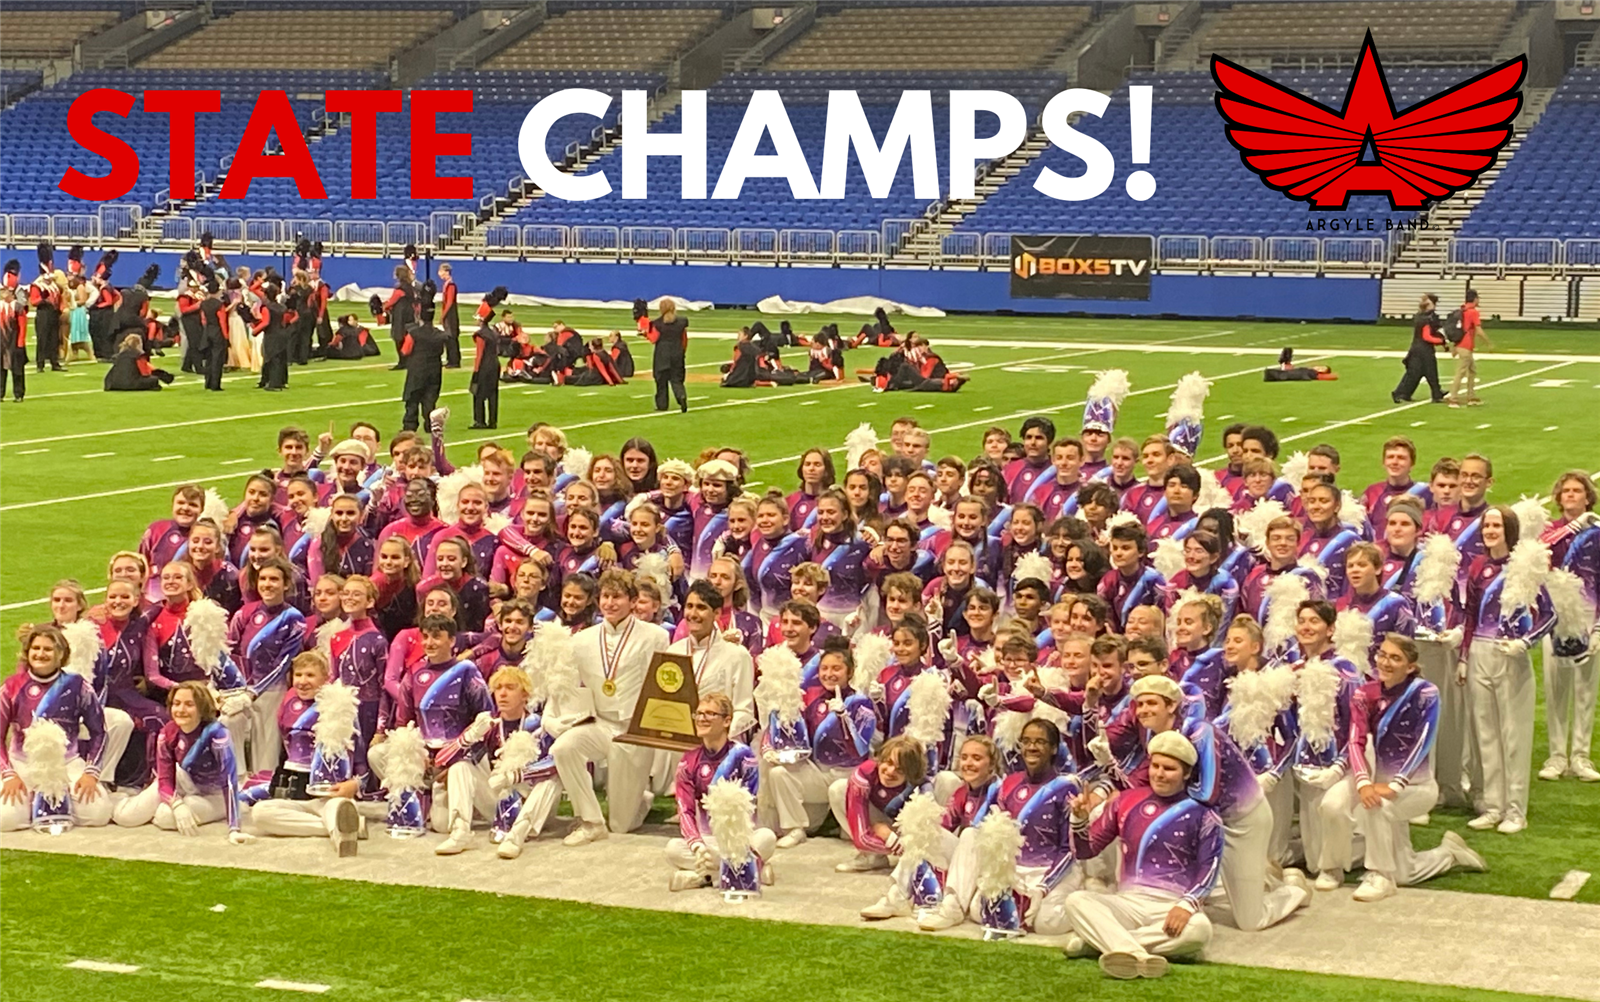  band state champs image